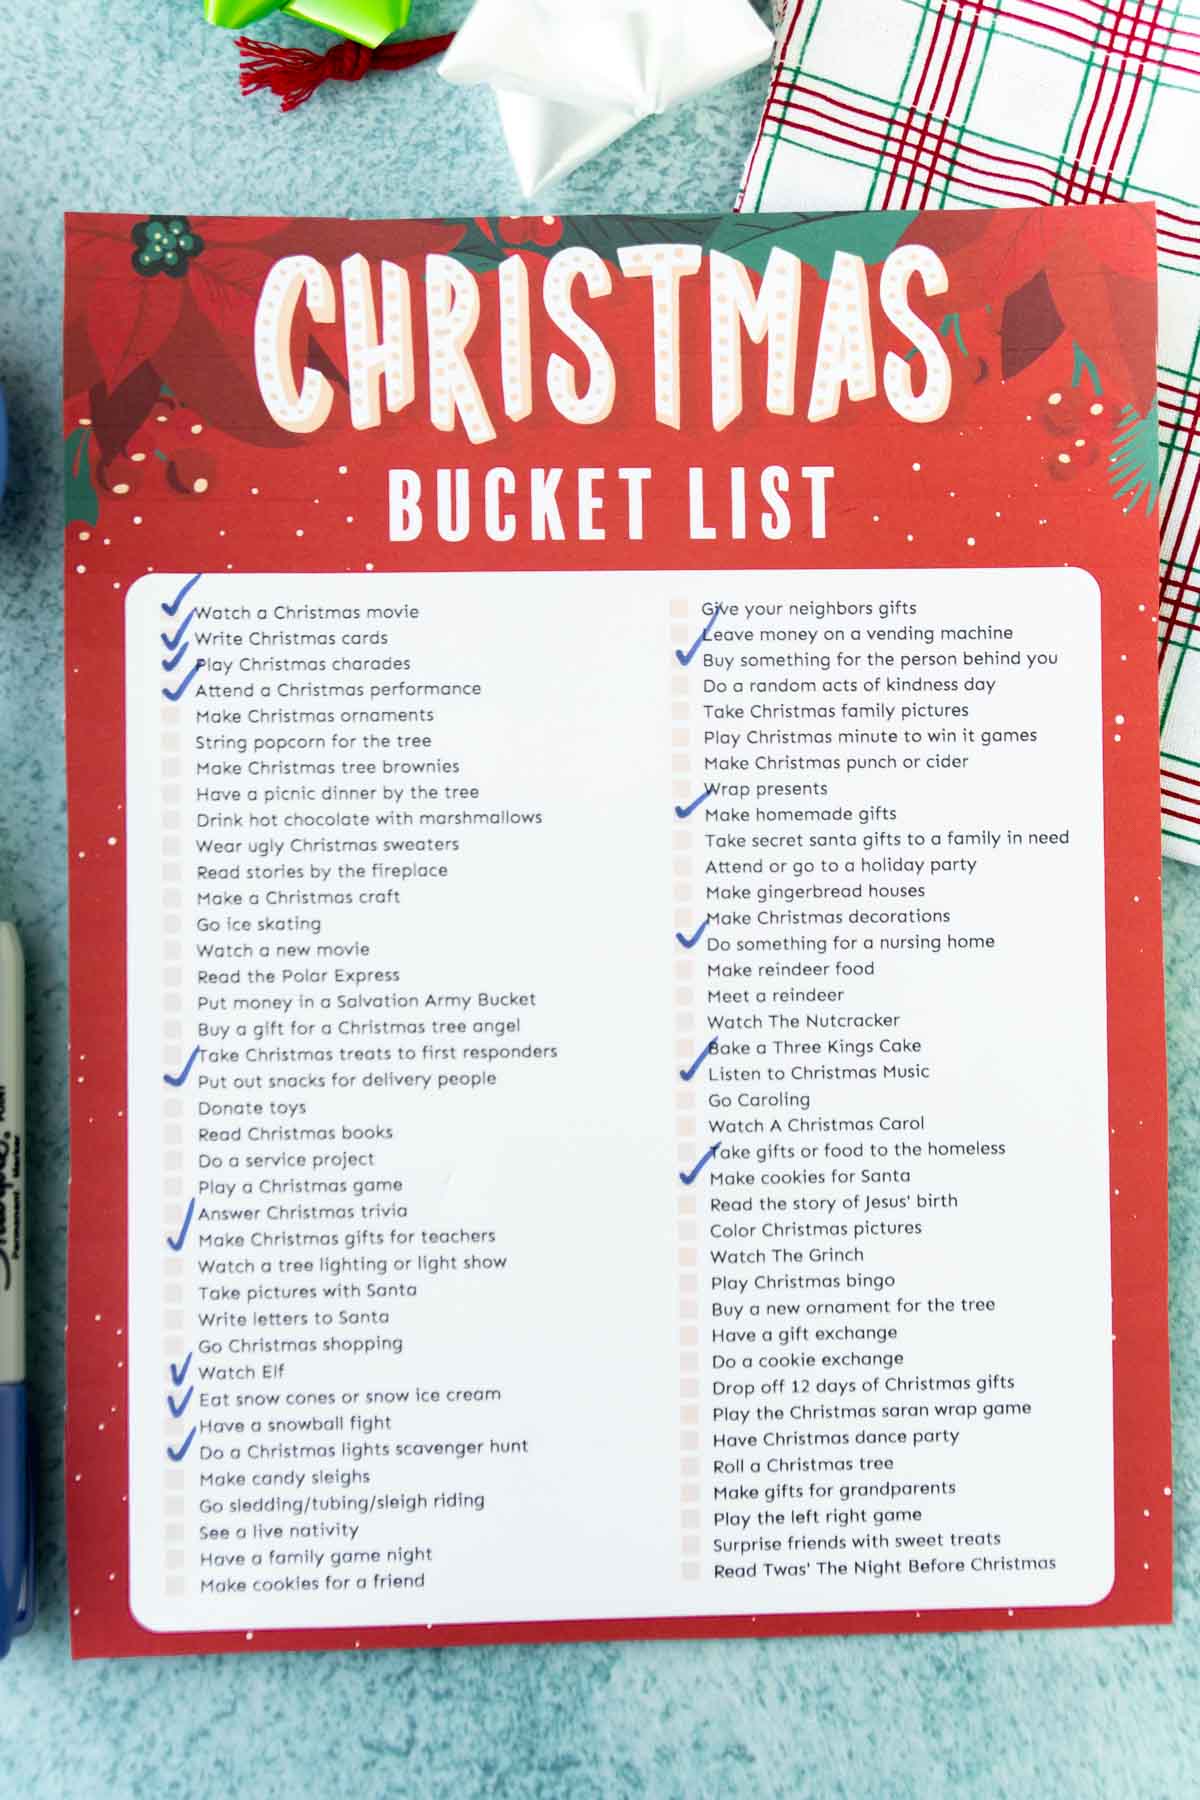 Christmas bucket list with things crossed off